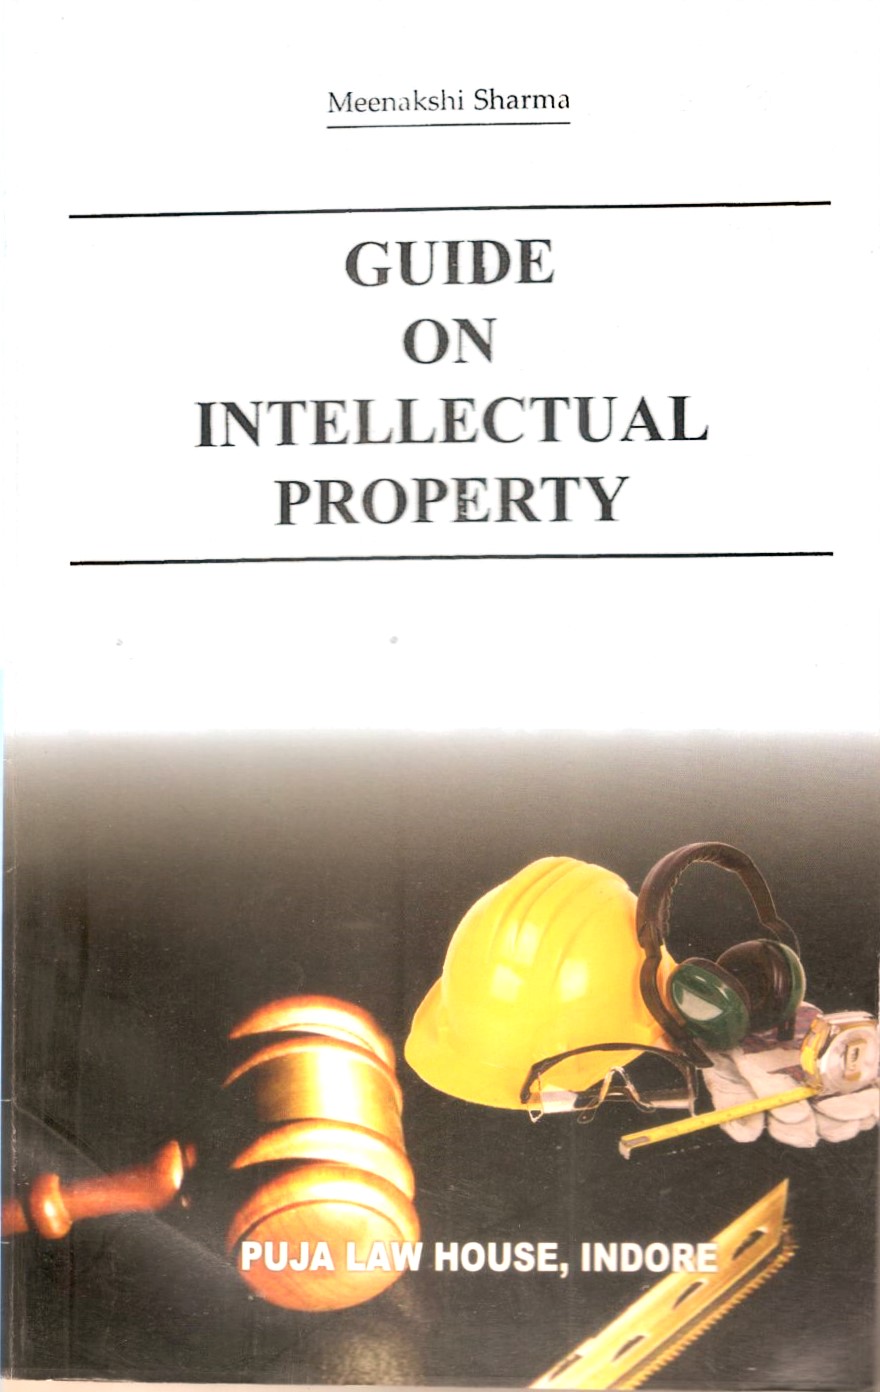 Guide on Intellectual Property